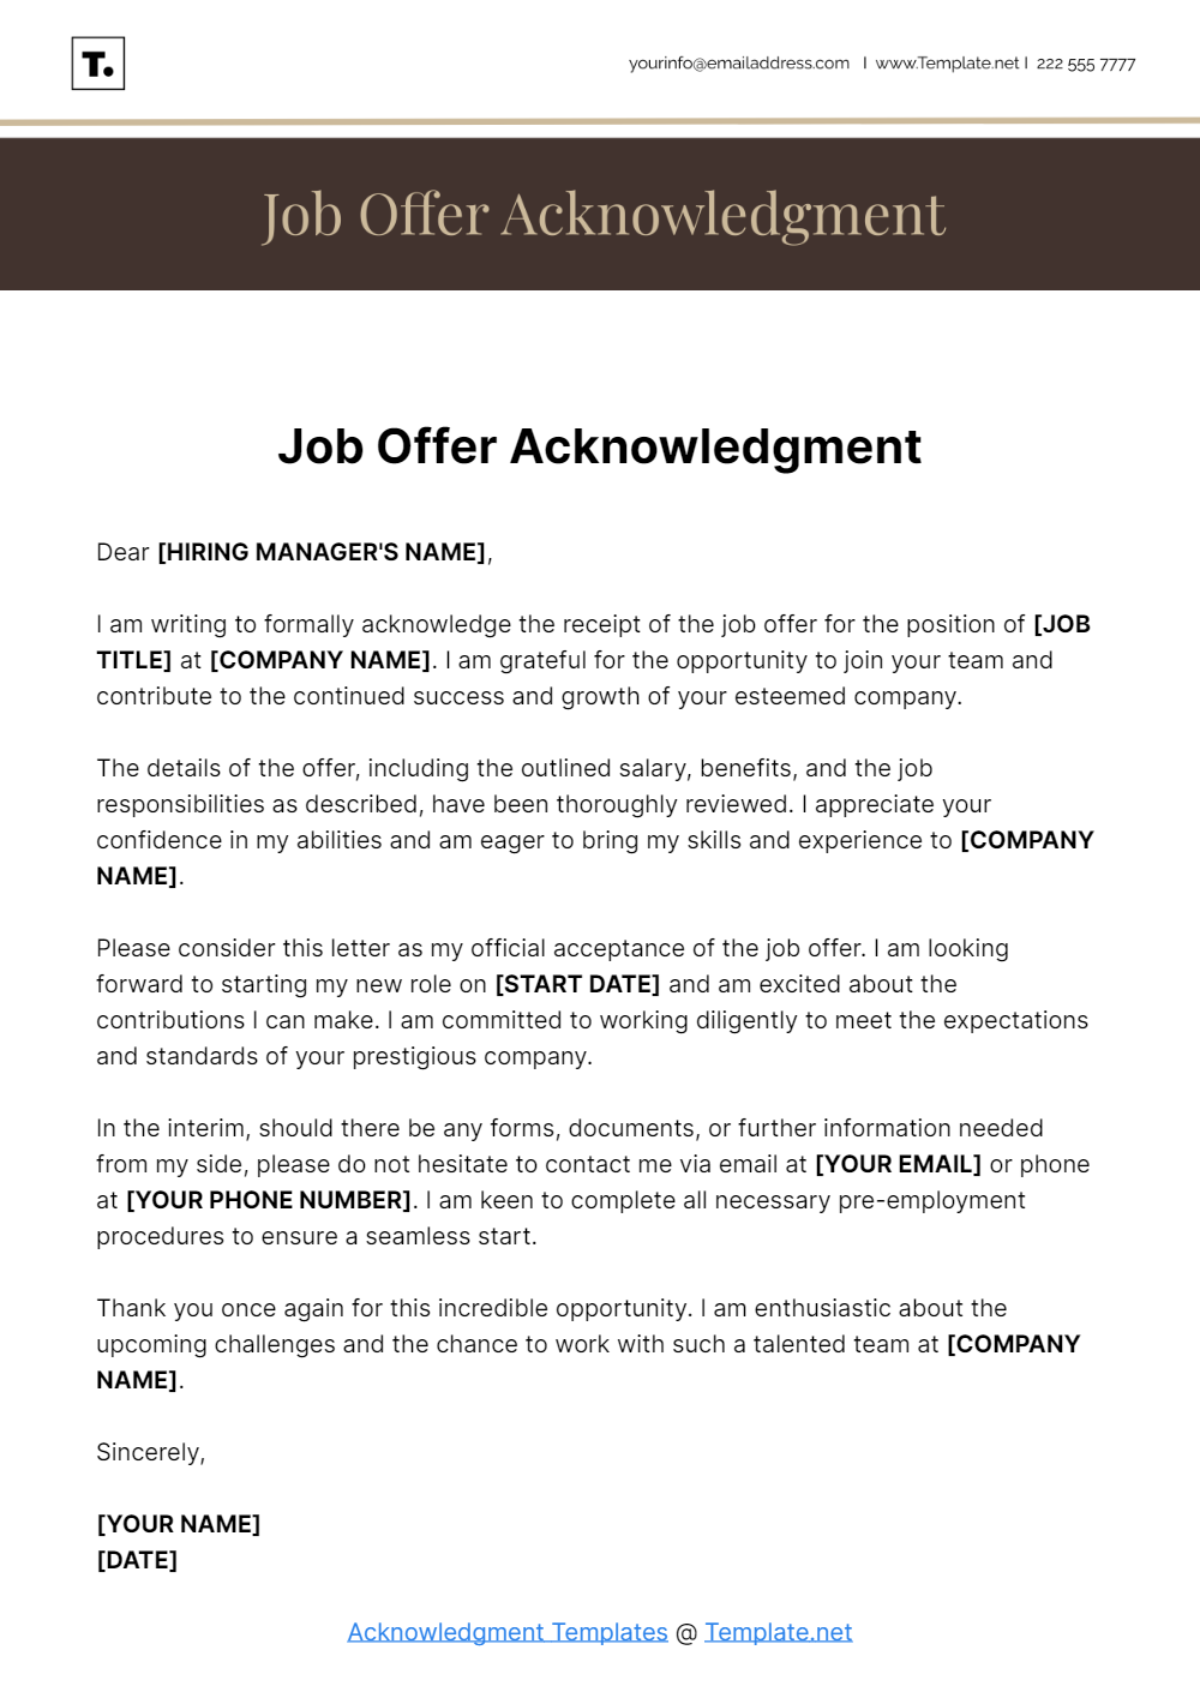 Job Offer Acknowledgment Template